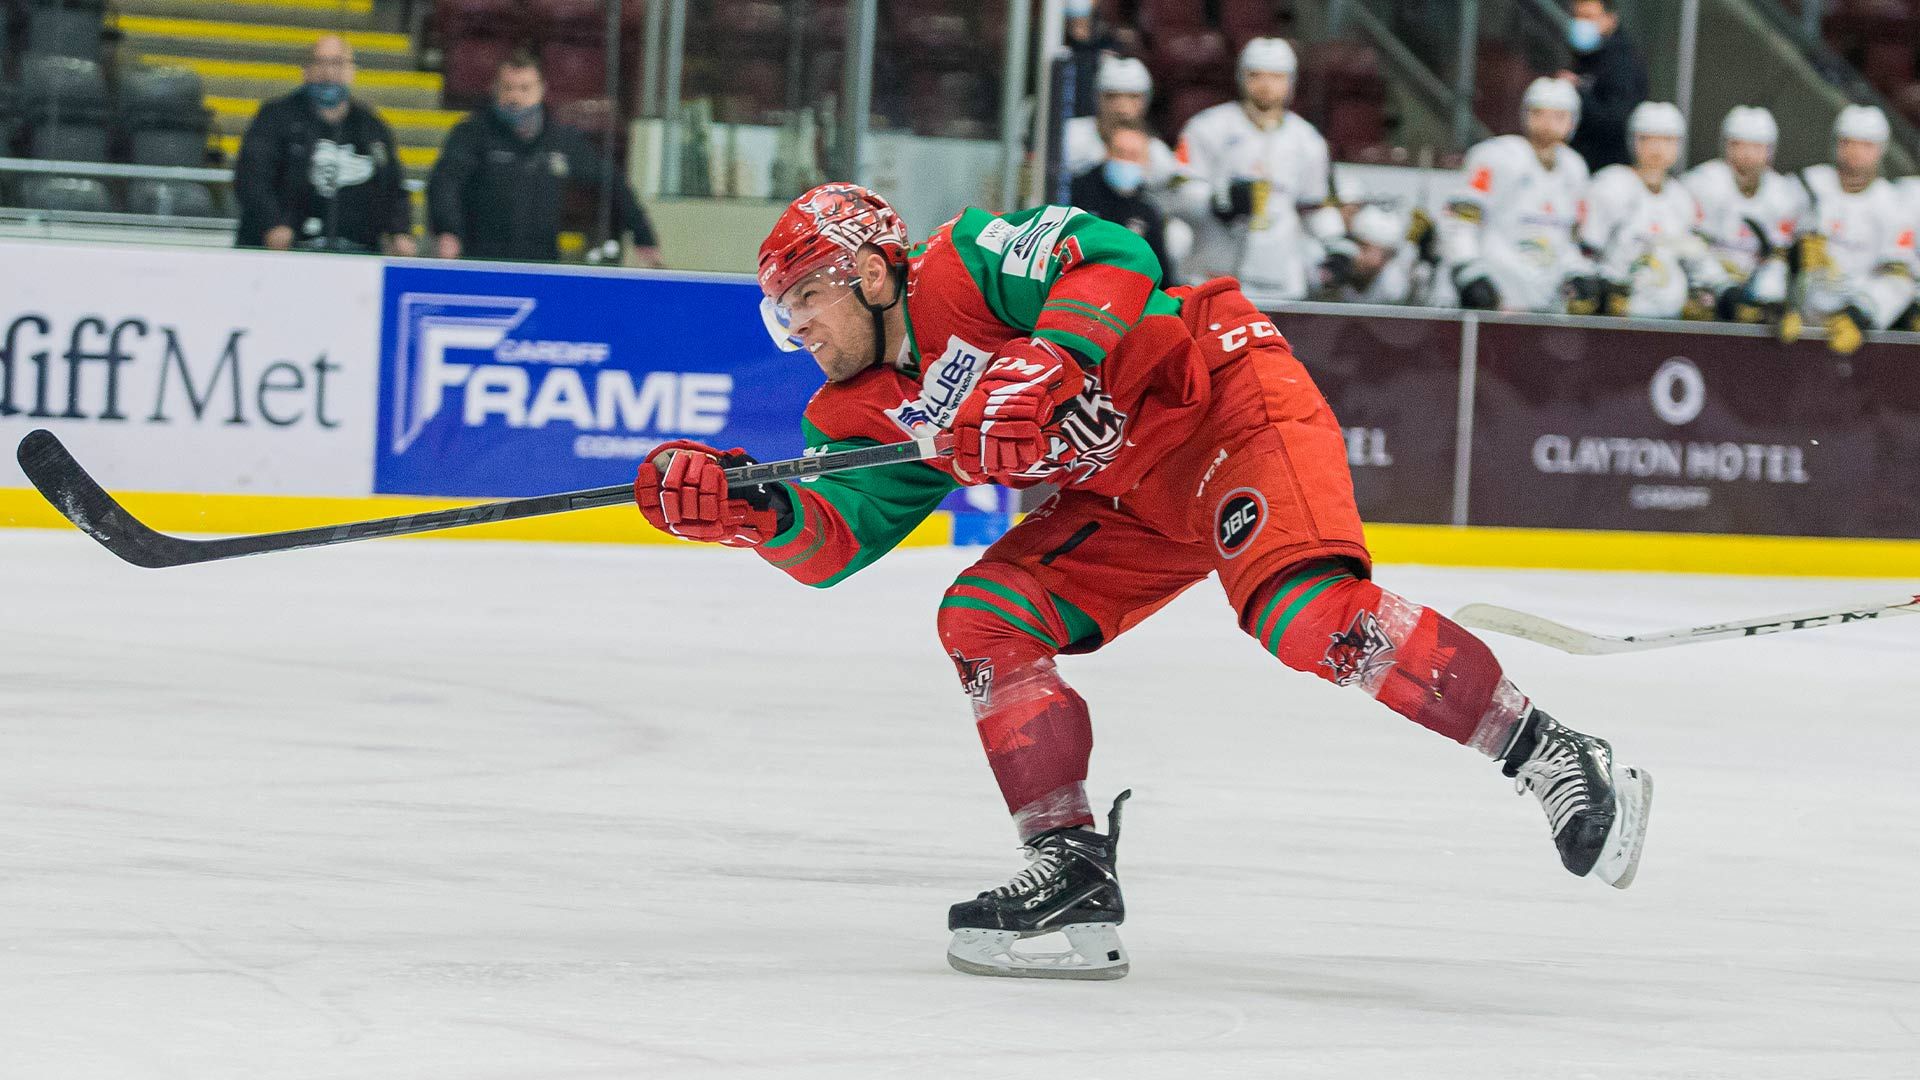 Win a signed/framed jersey in this week's raffle :: Cardiff Devils